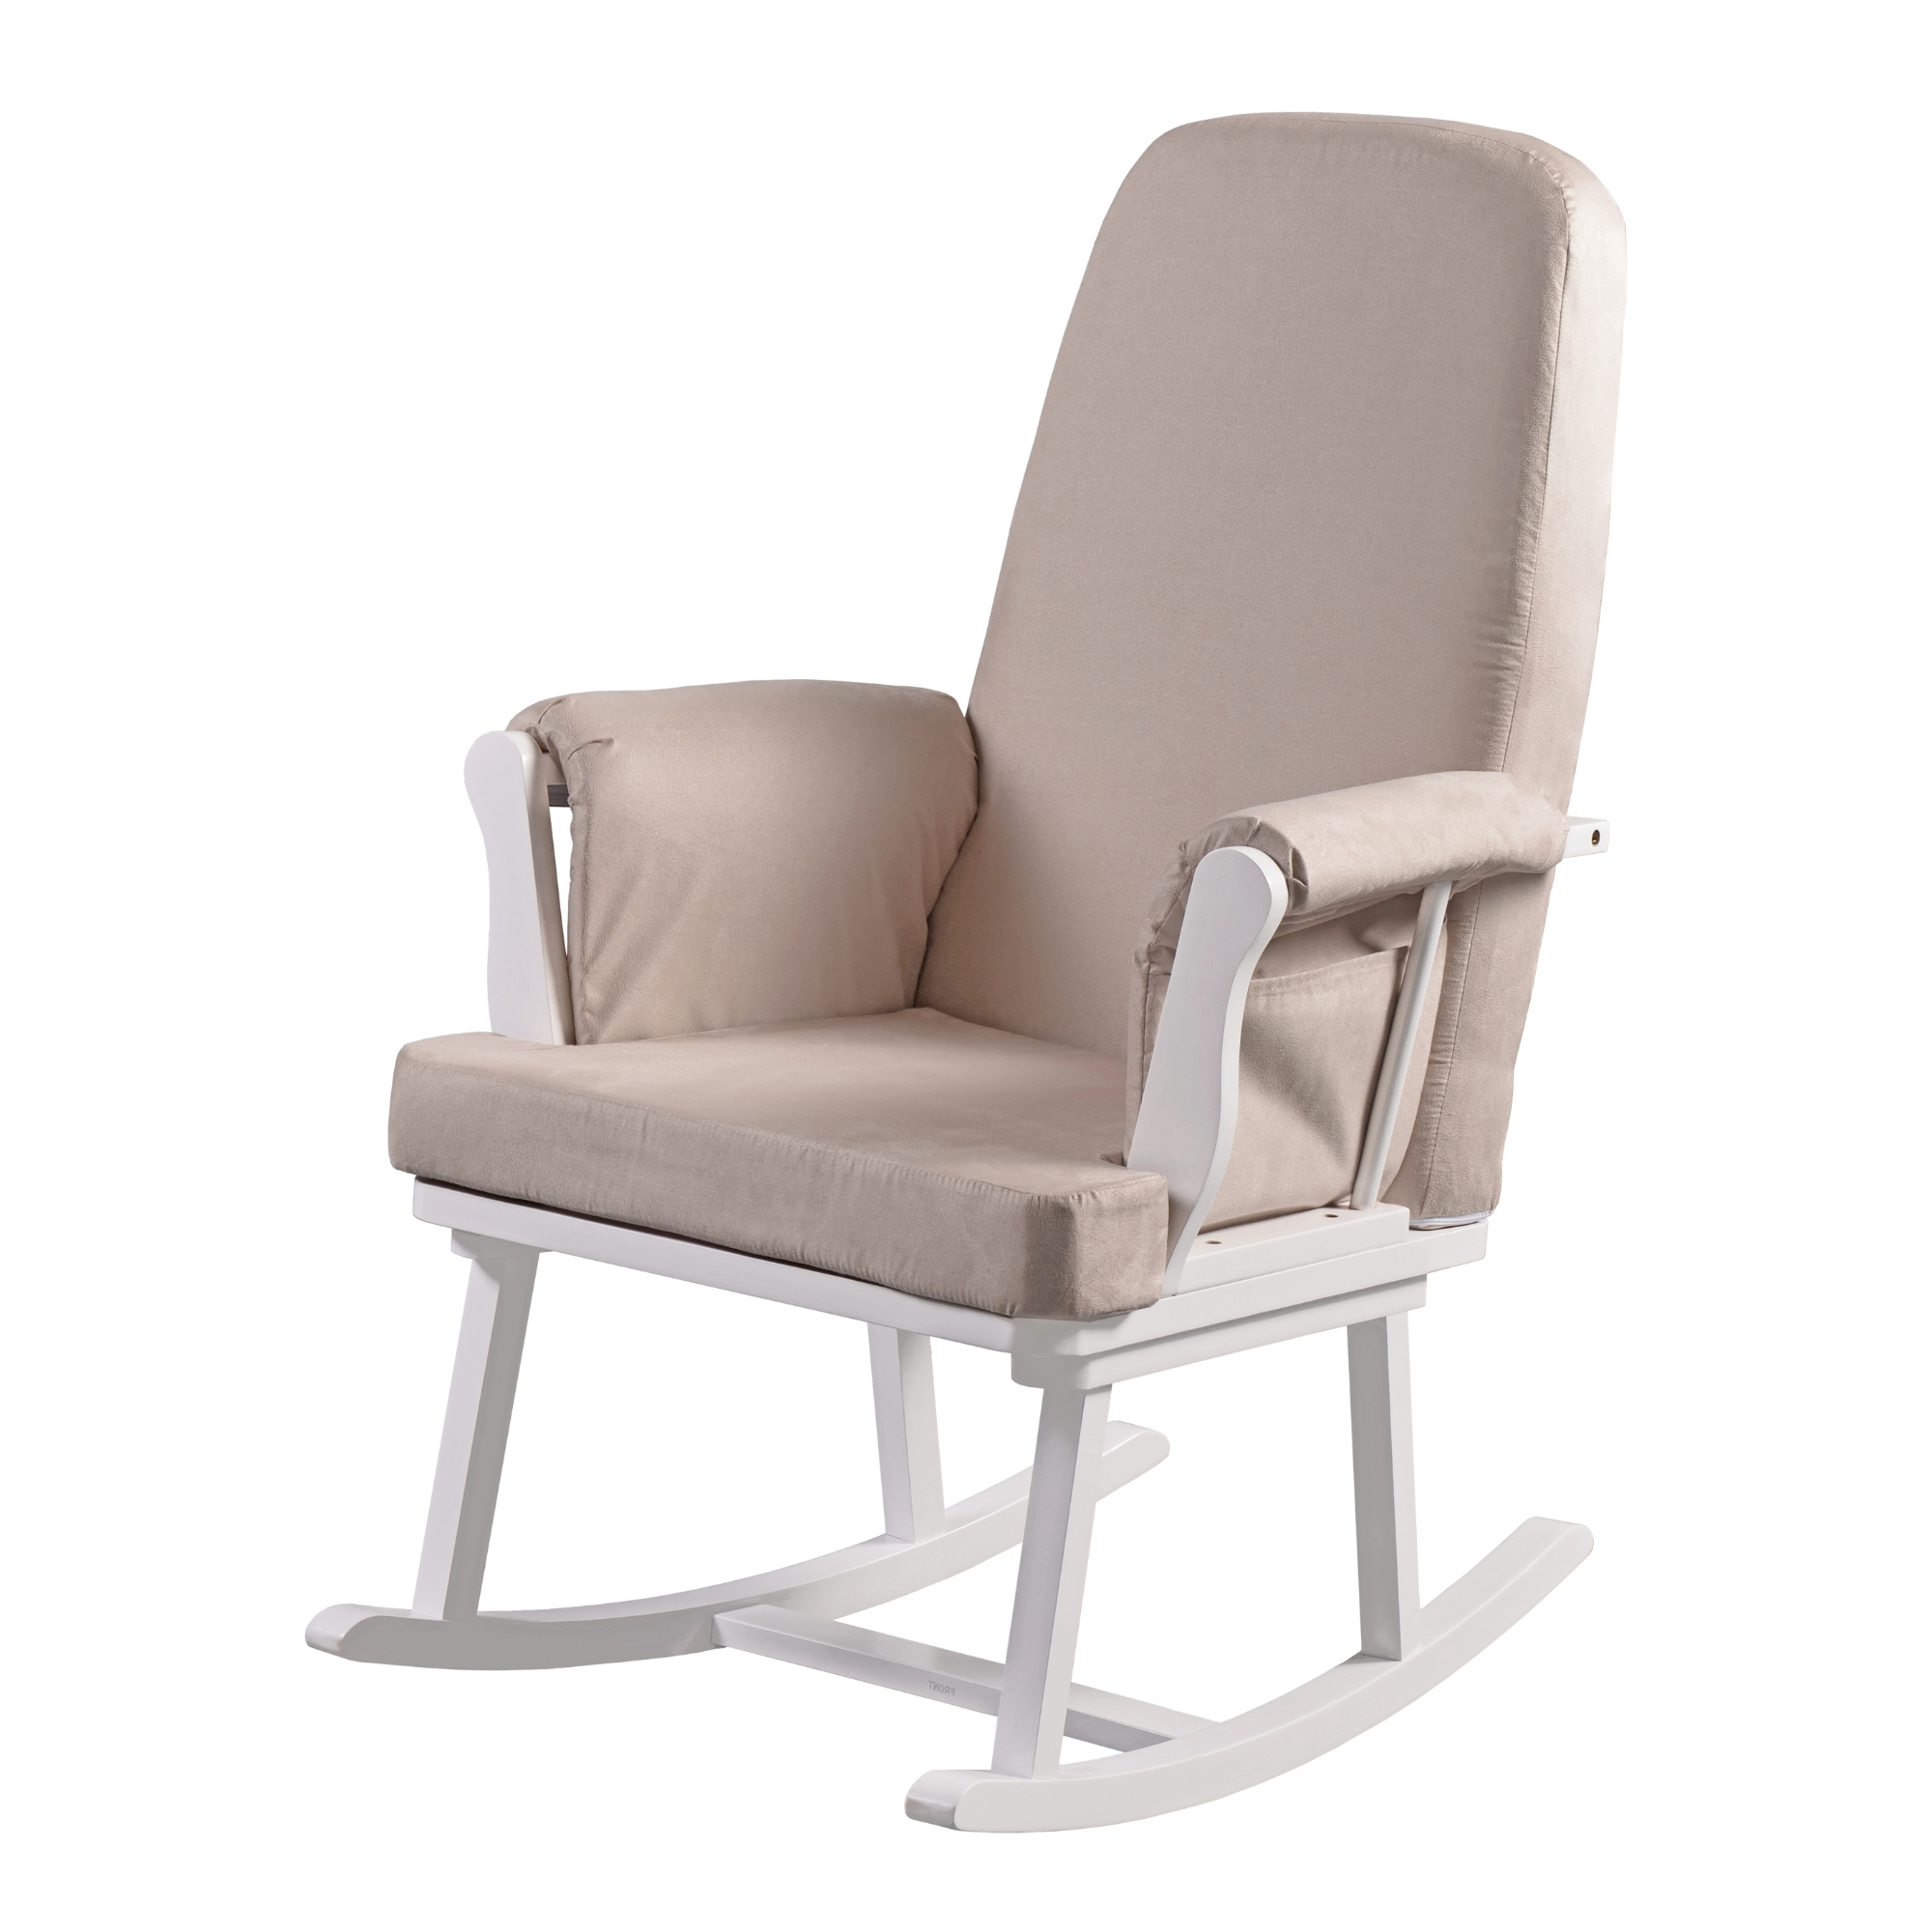 How to Choose a Nursing Chair for Breastfeeding